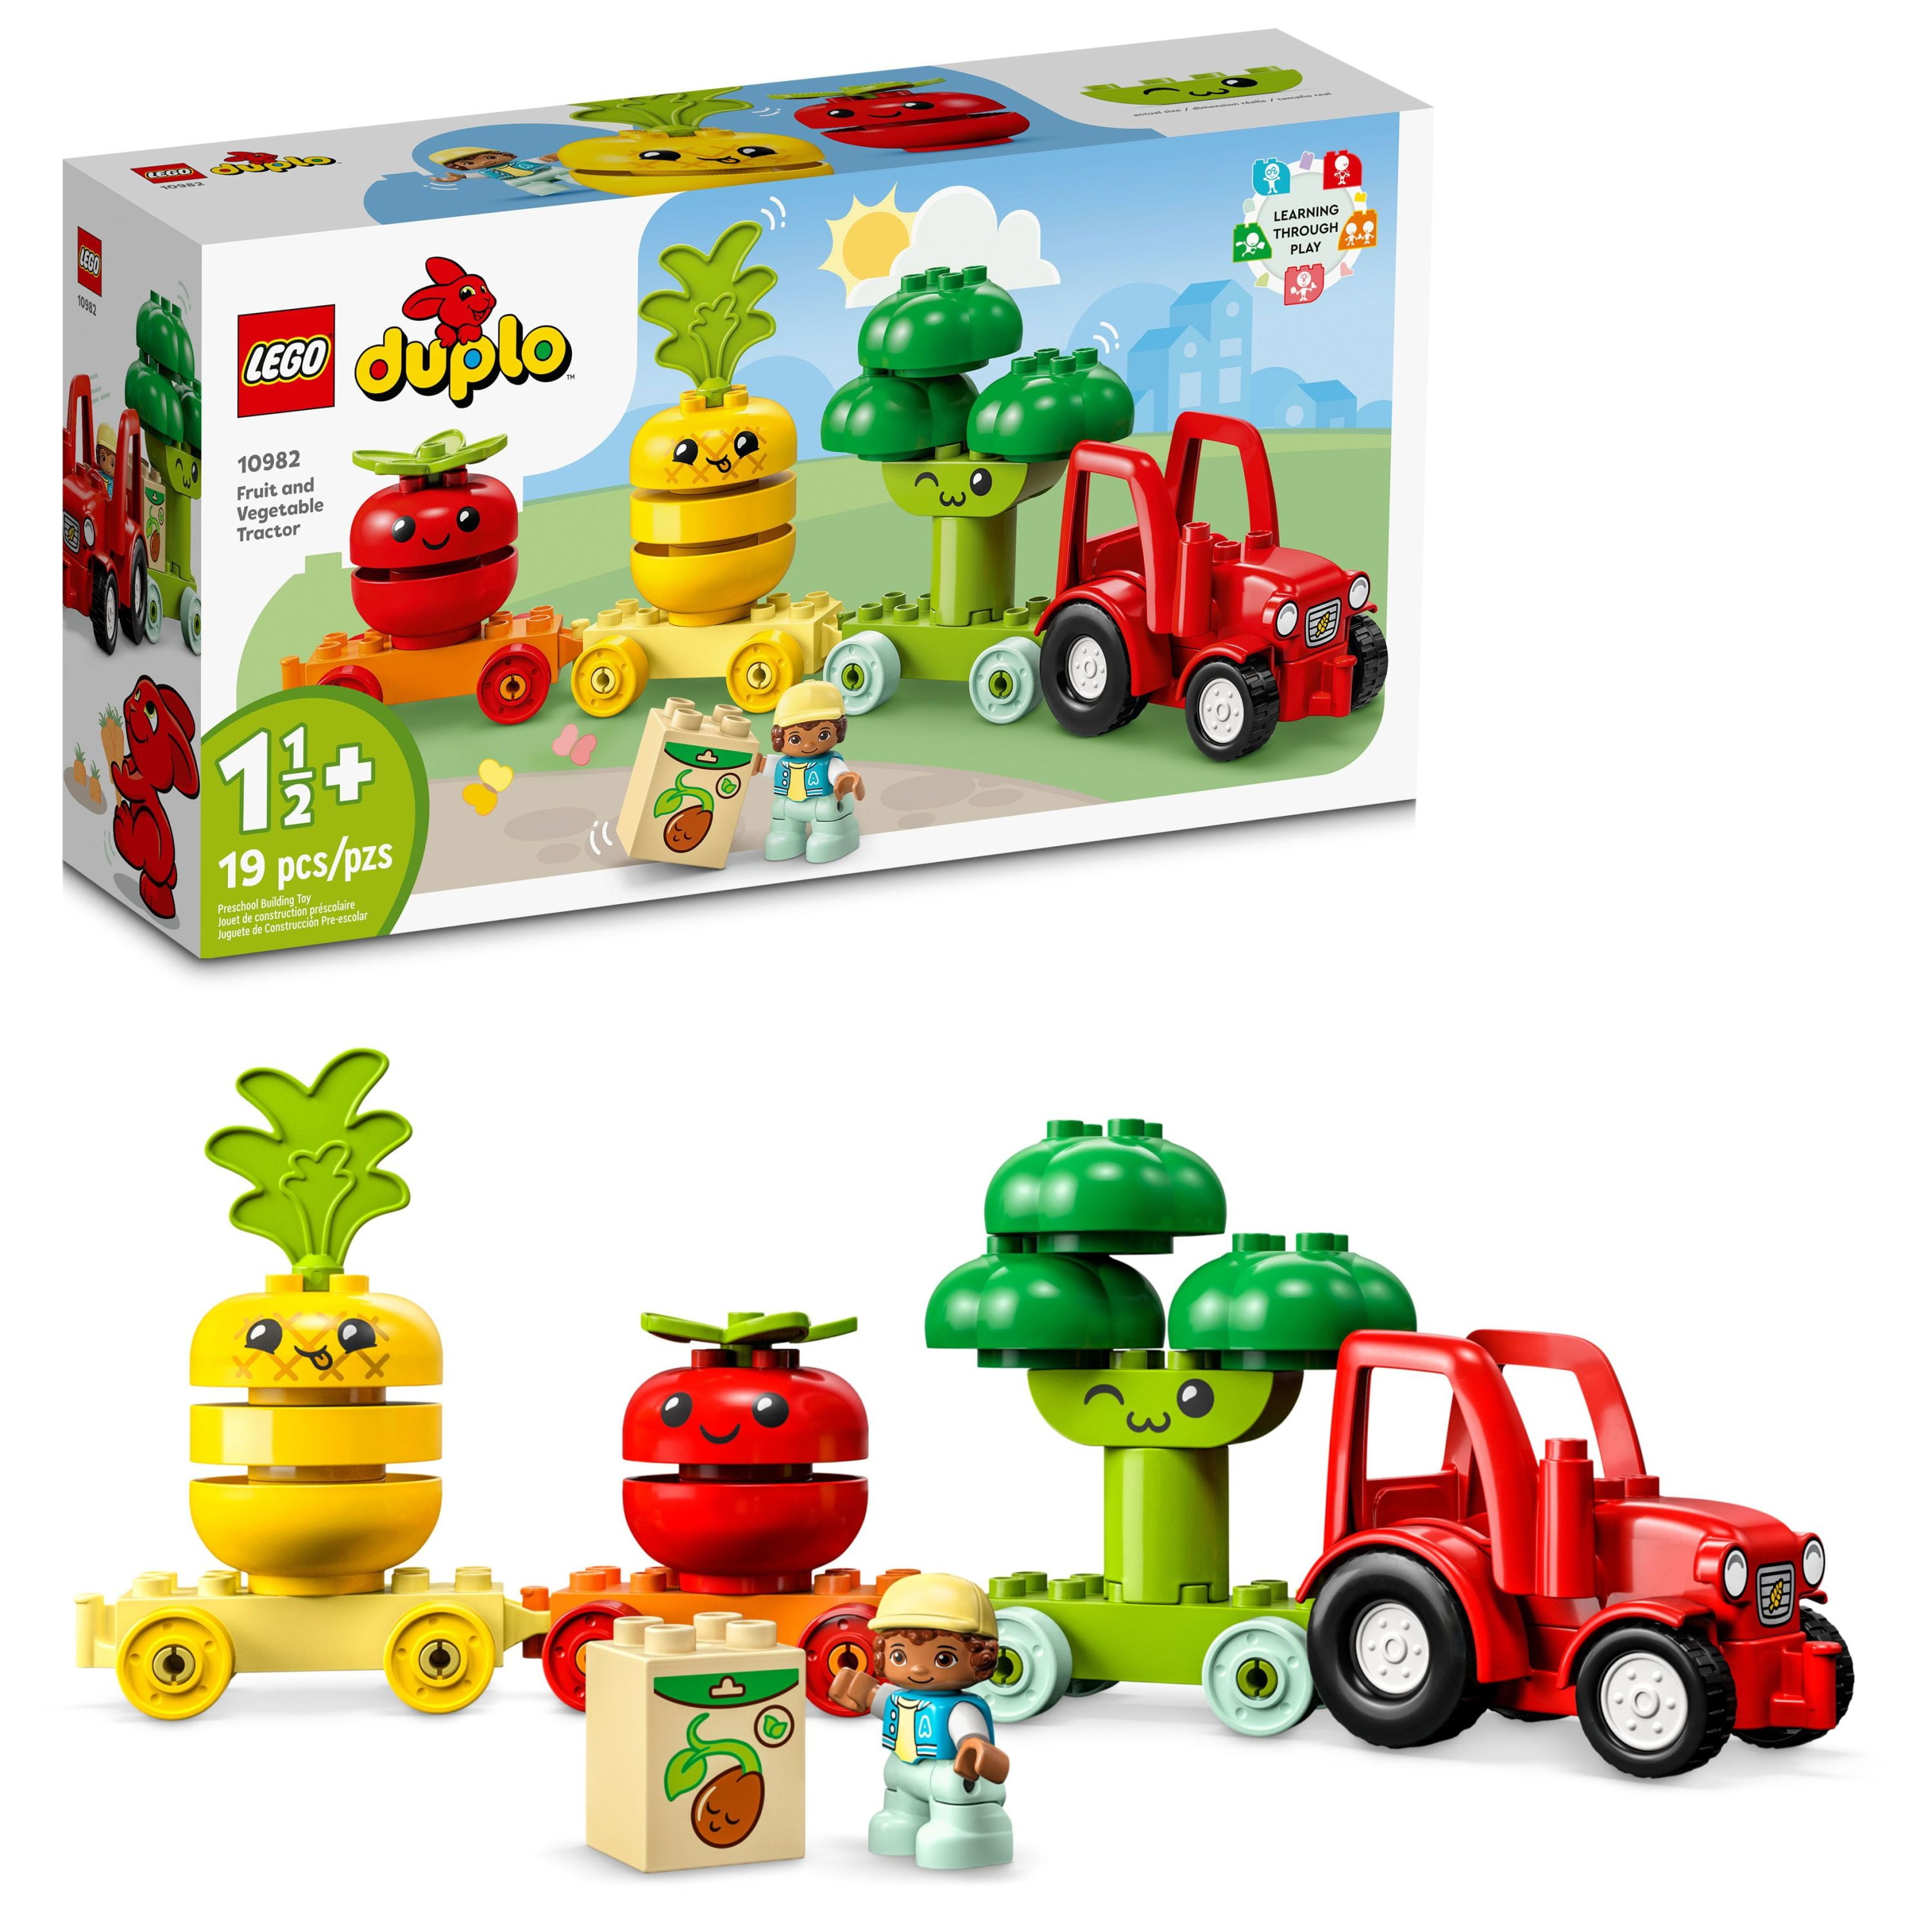 LEGO DUPLO My First Alphabet Truck Educational Building Toy for Toddlers Pieces) - Walmart.com